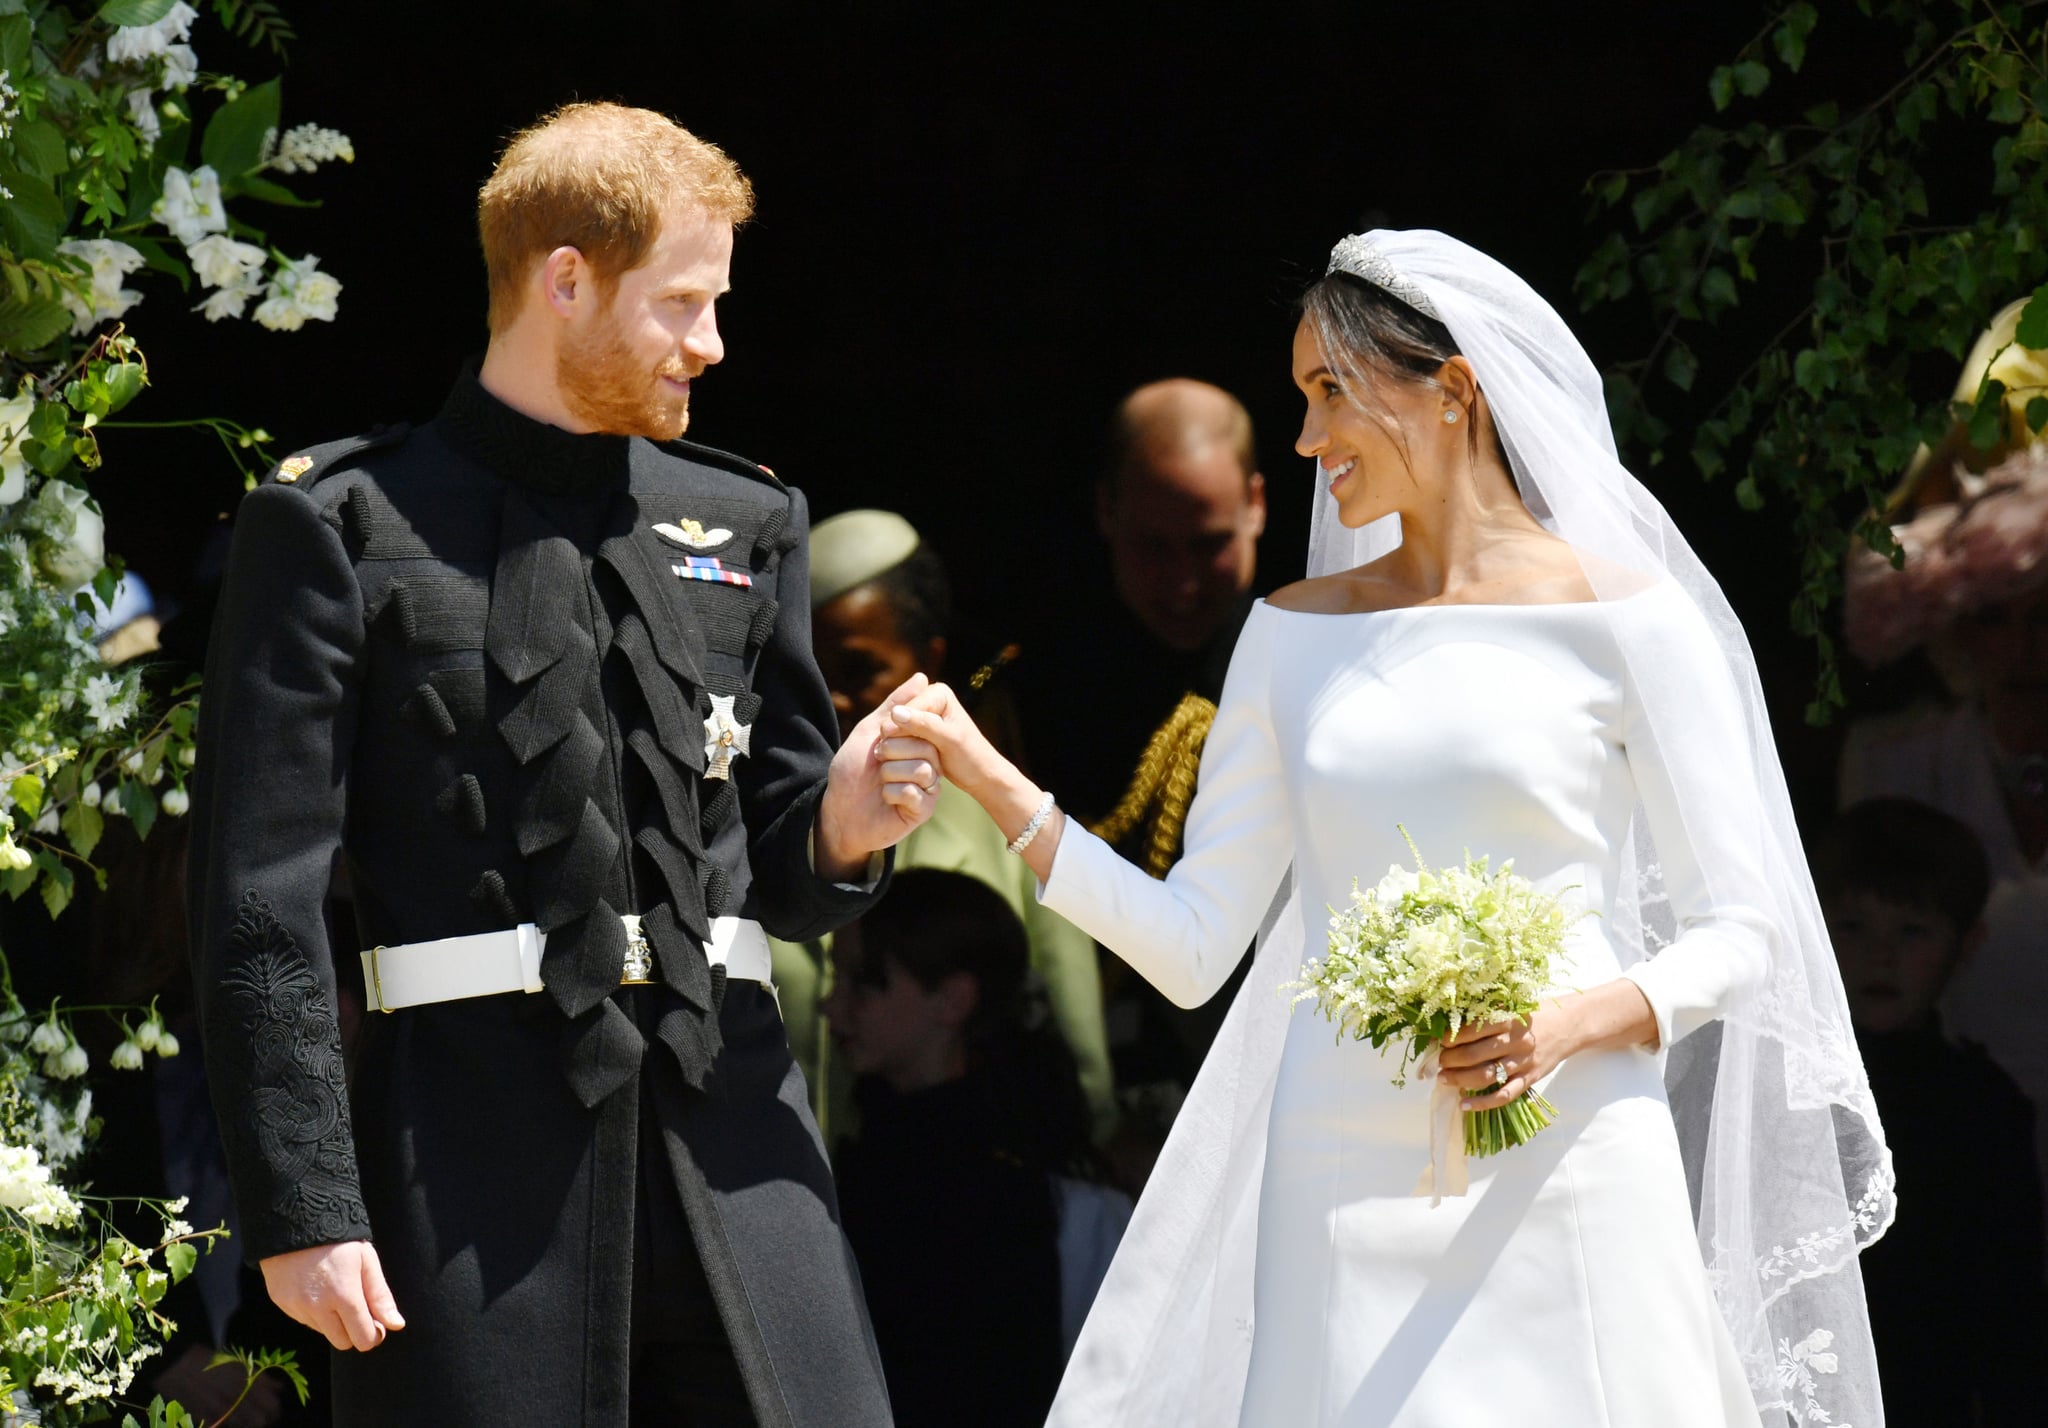 TOPSHOT - Britain's Prince Harry, Duke of Sussex and his wife Meghan, Duchess of Sussex emerge from the West Door of St George's Chapel, Windsor Castle, in Windsor, on May 19, 2018 after their wedding ceremony. (Photo by Ben Birchall / POOL / AFP)        (Photo credit should read BEN BIRCHALL/AFP via Getty Images)